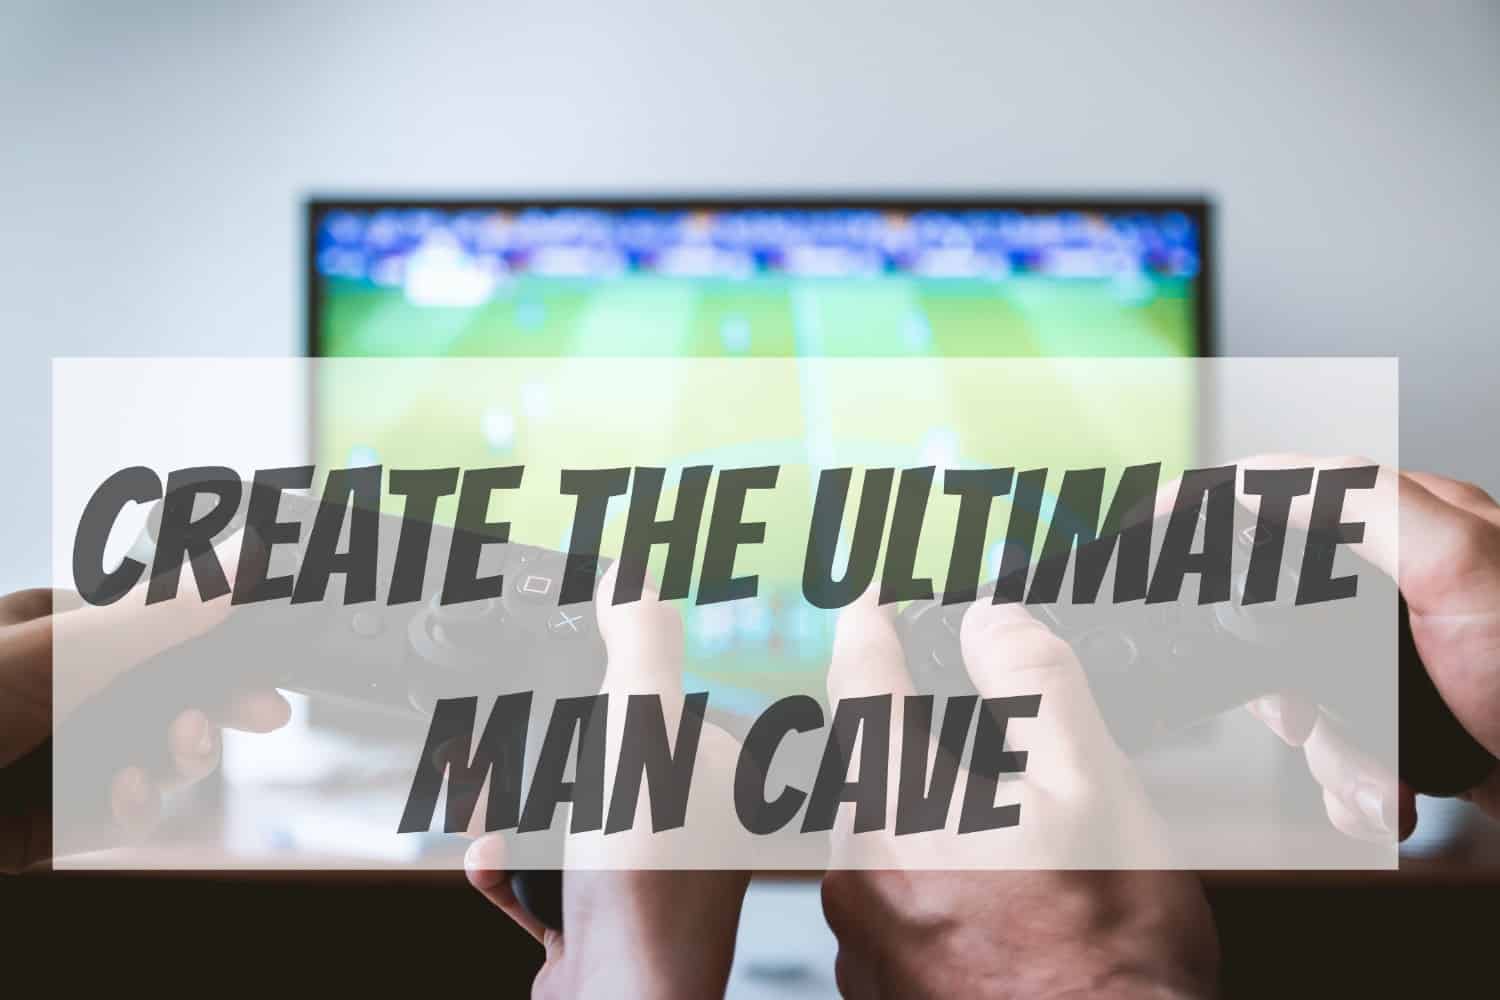 Create the ultimate man cave